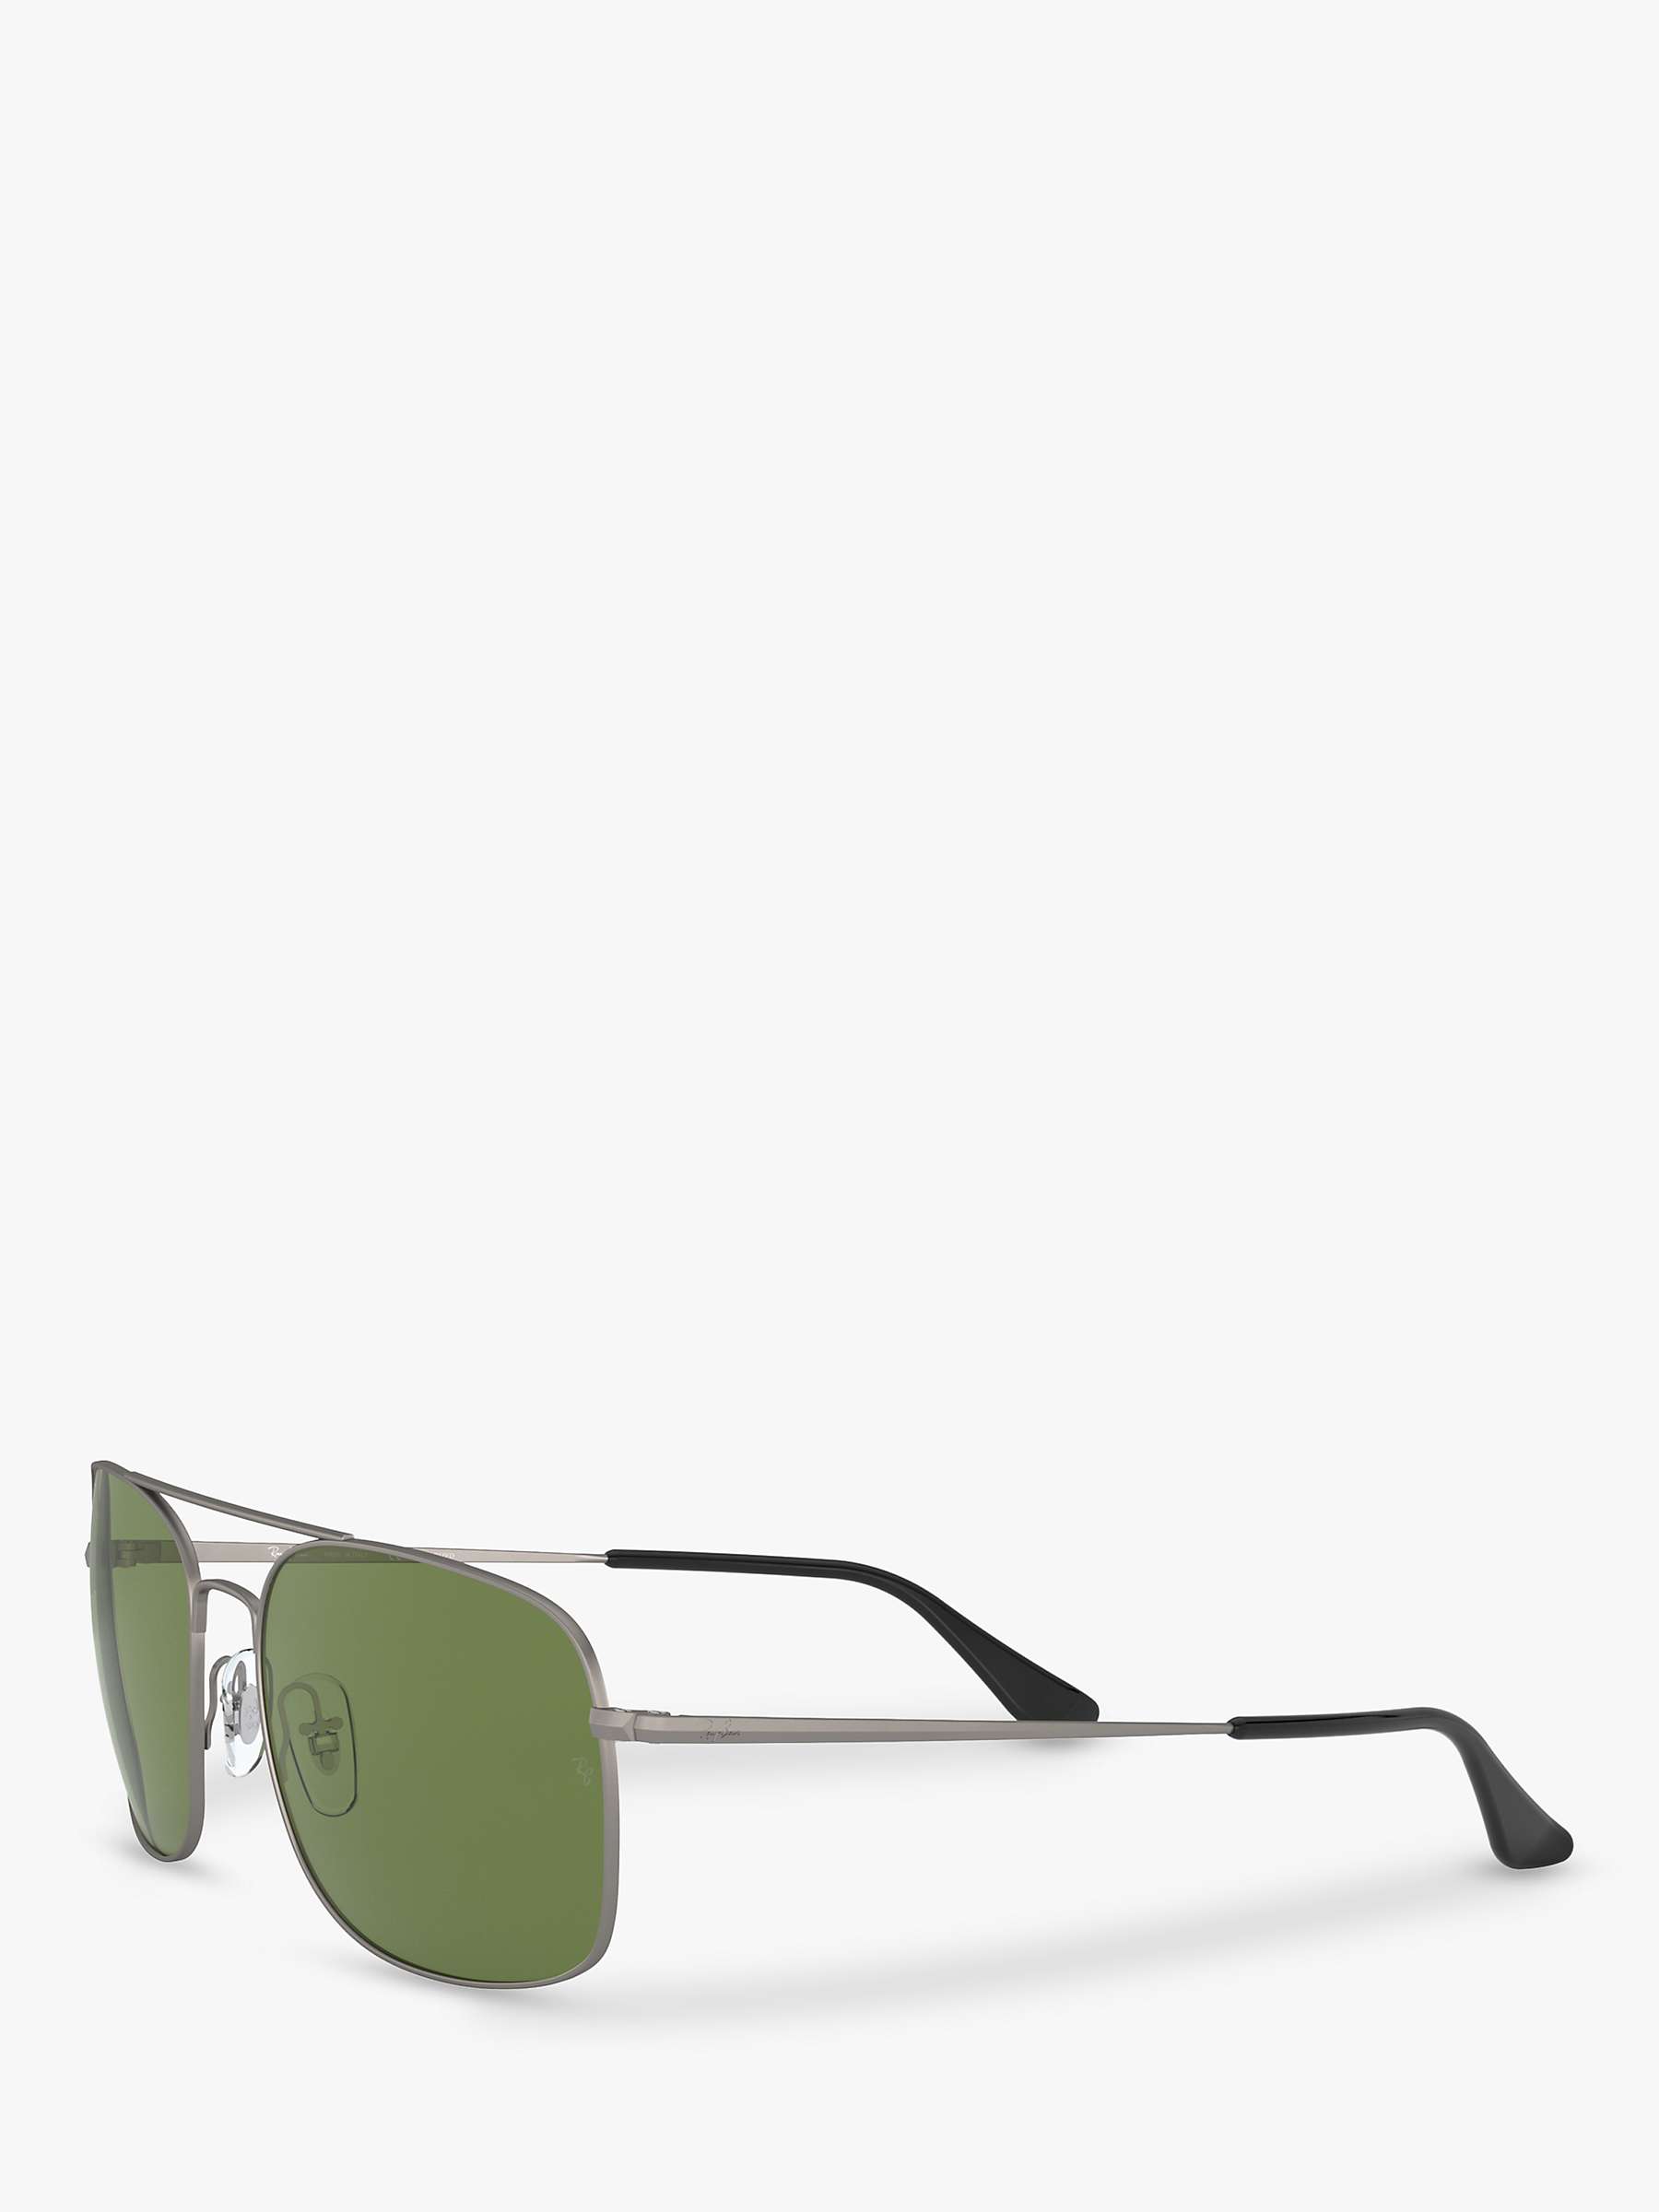 Buy Ray-Ban RB3611 Unisex The Colonel Polarised Square Sunglasses, Matte Gunmetal/Green Online at johnlewis.com